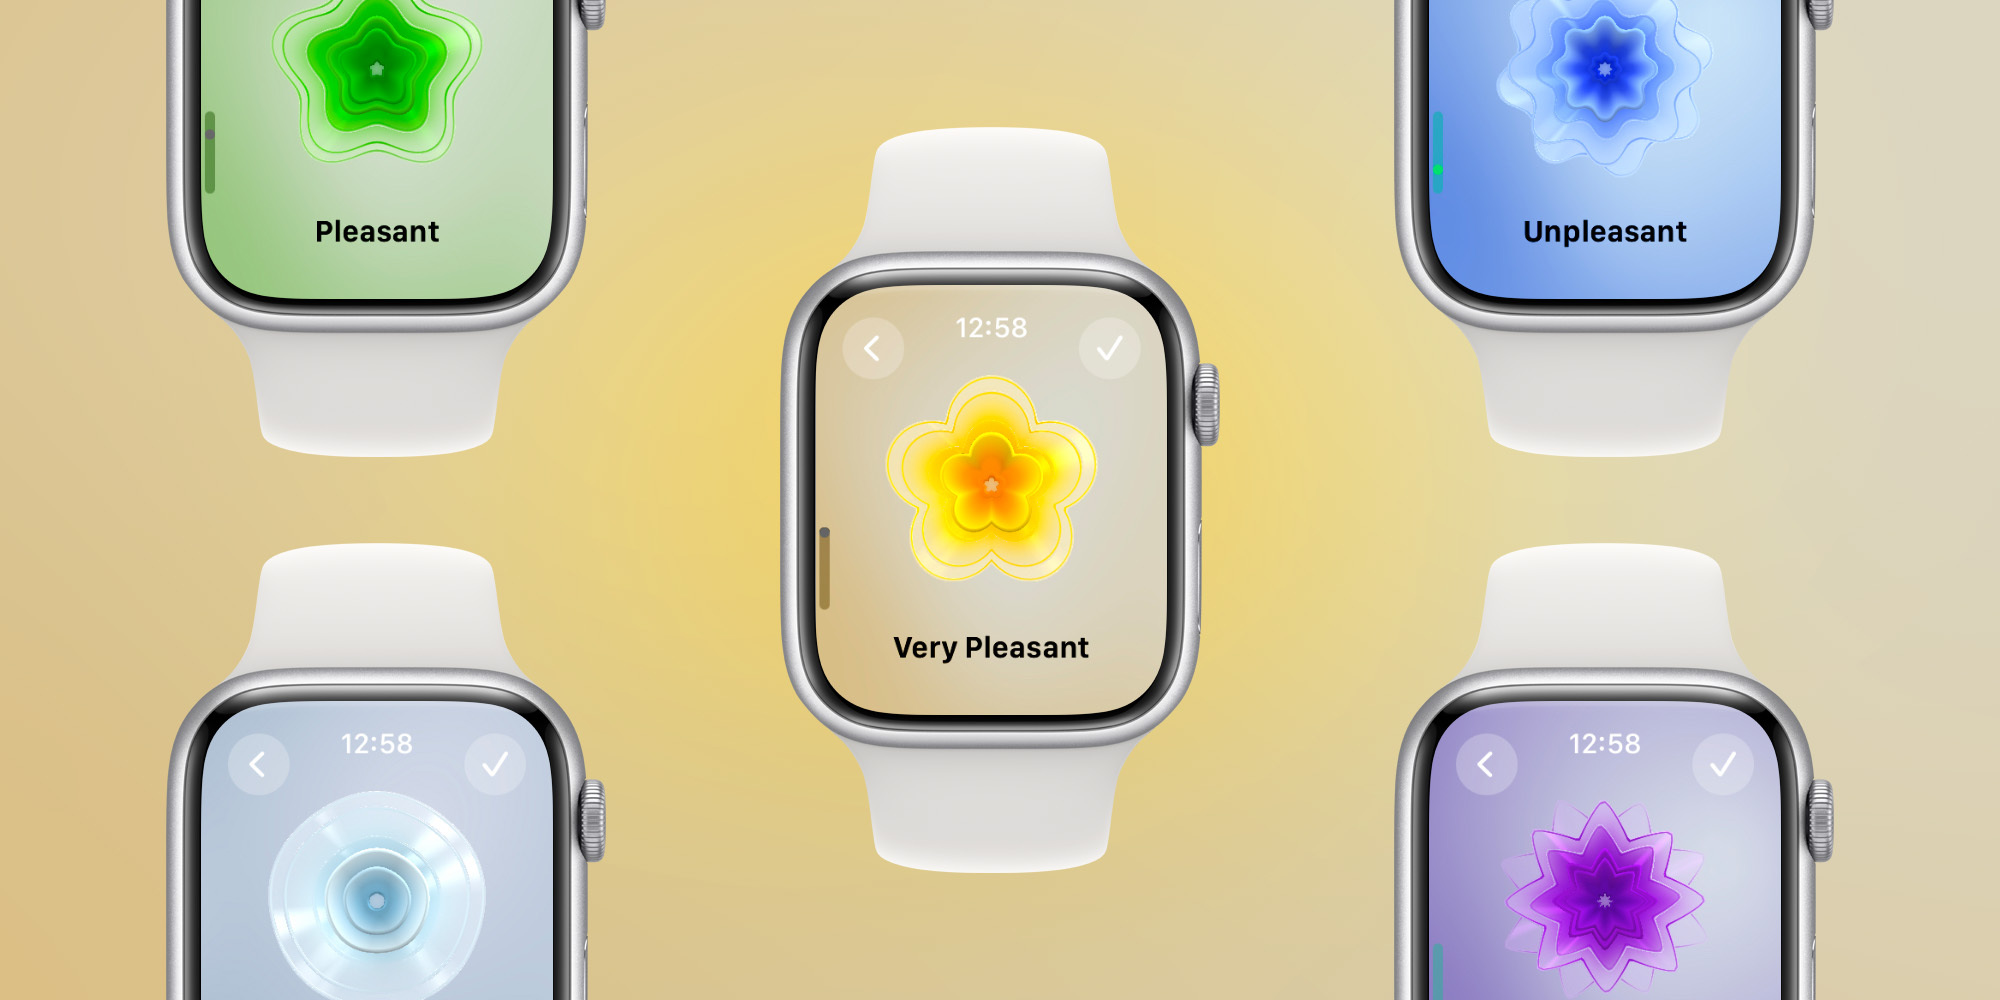 https://9to5mac.com/wp-content/uploads/sites/6/2023/06/track-mood-on-apple-watch.jpg?quality=82&strip=all